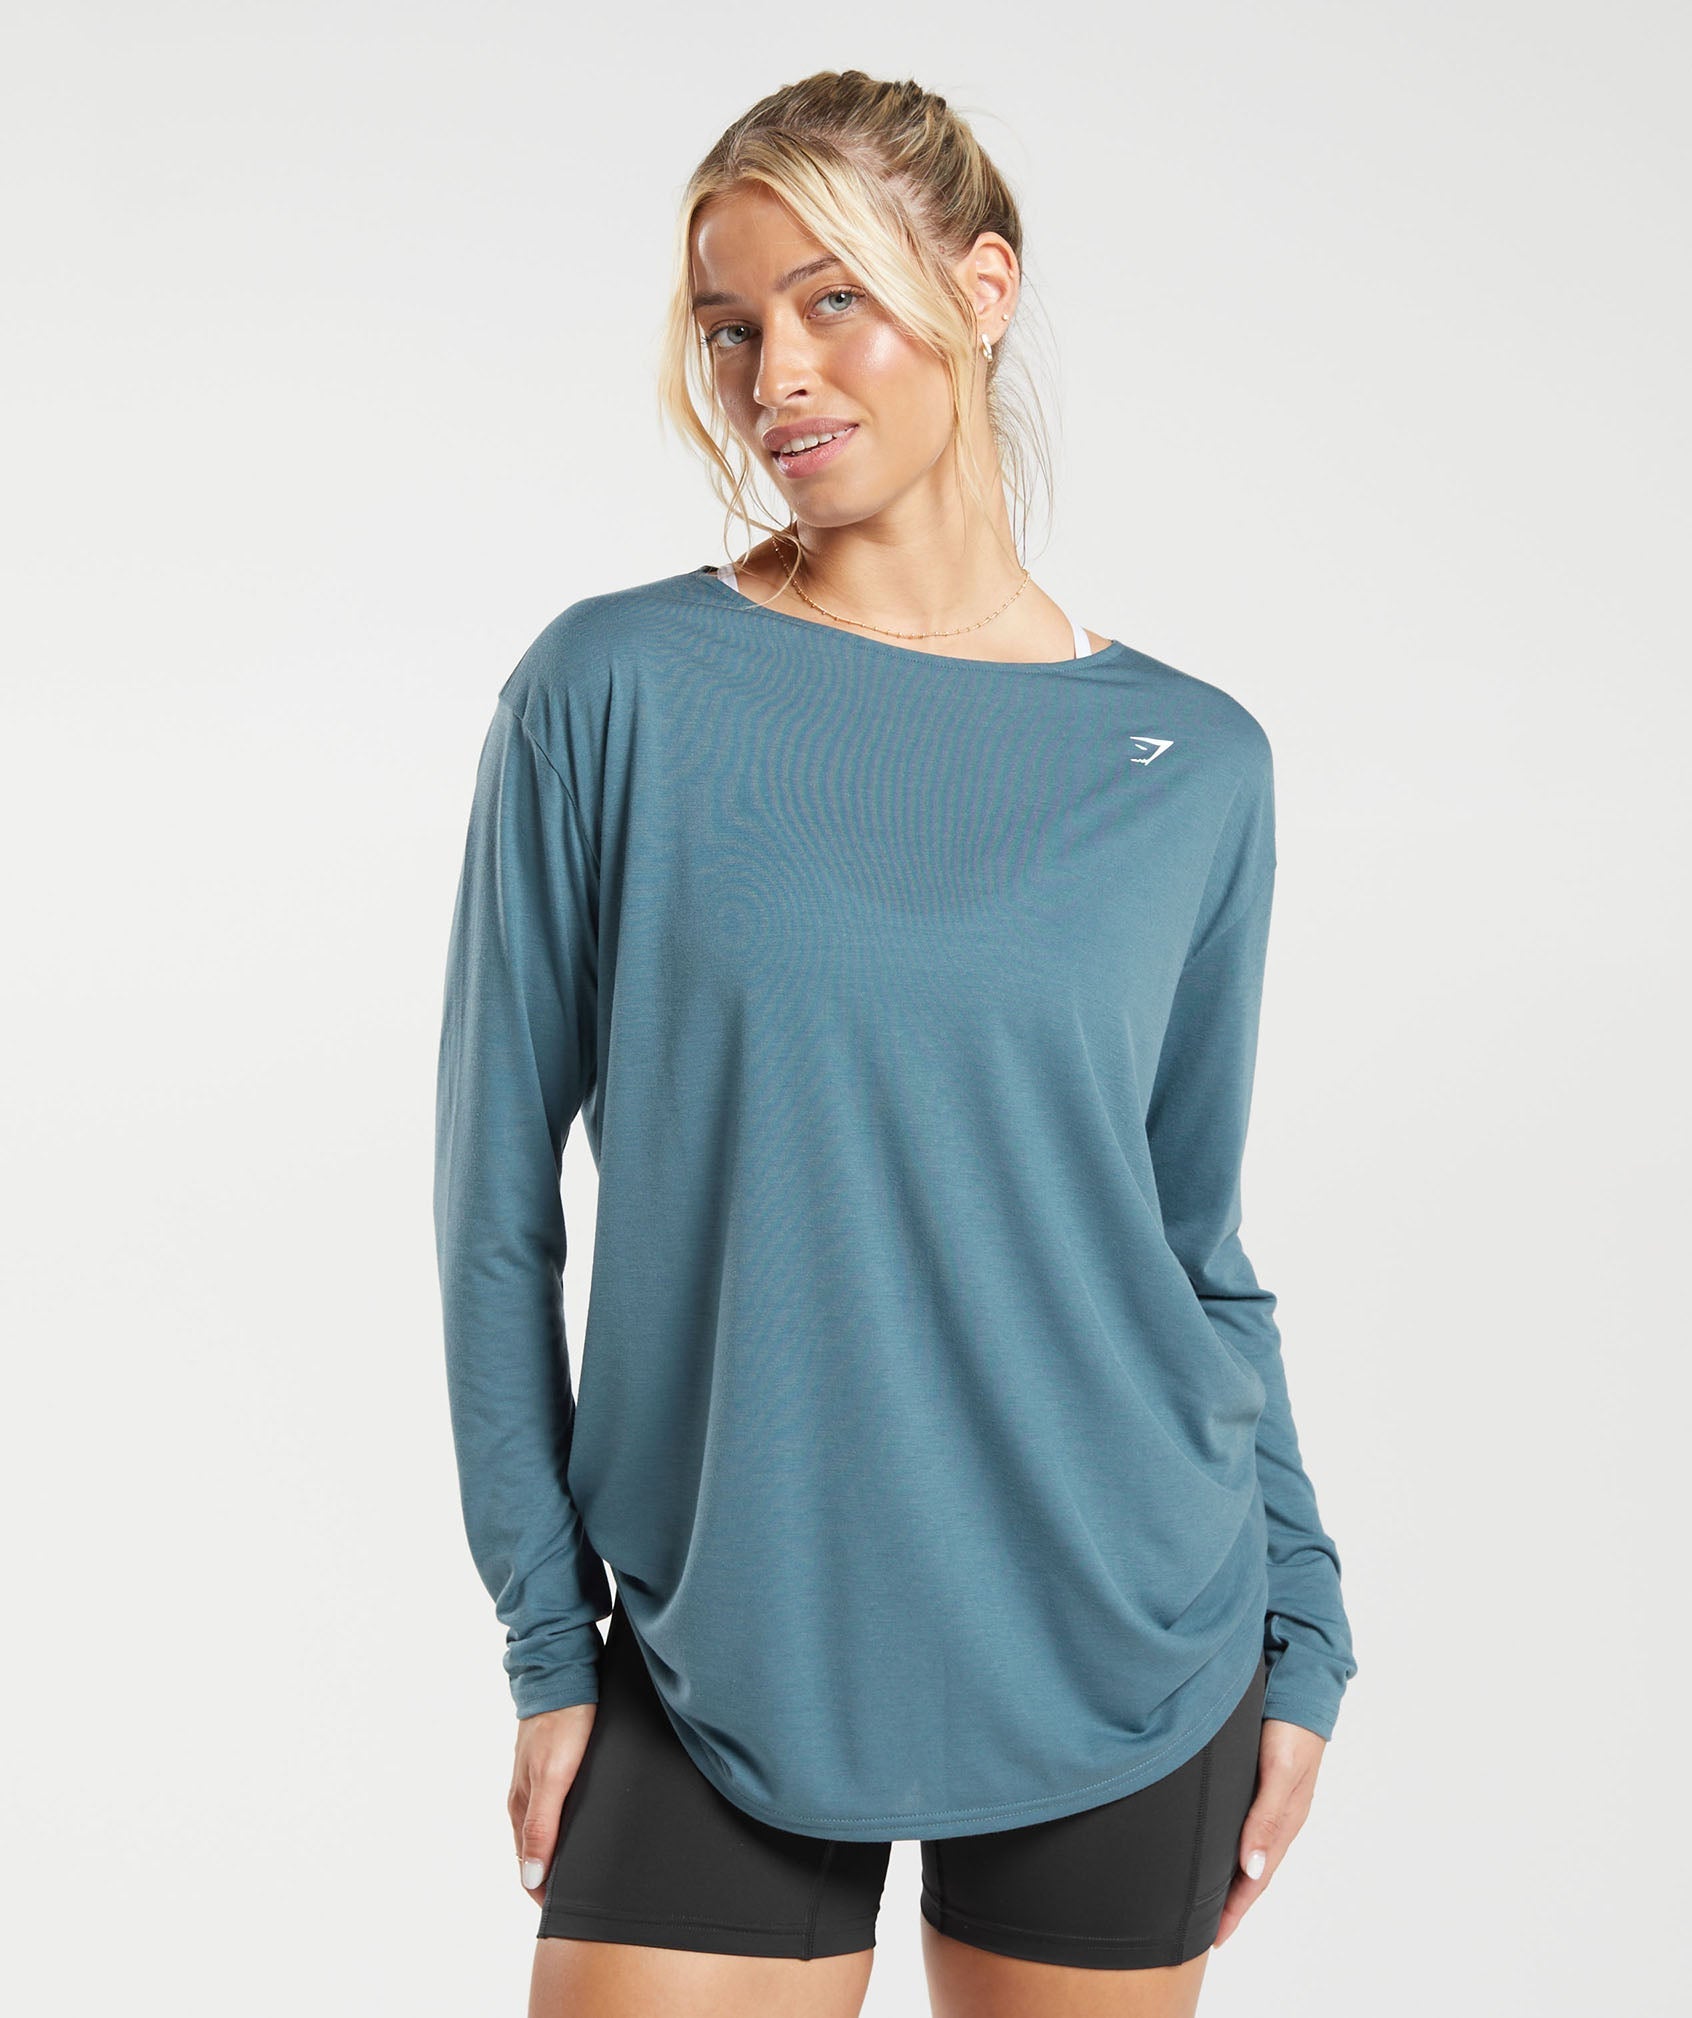 Super Soft Cut-Out Long Sleeve Top in Denim Teal - view 1